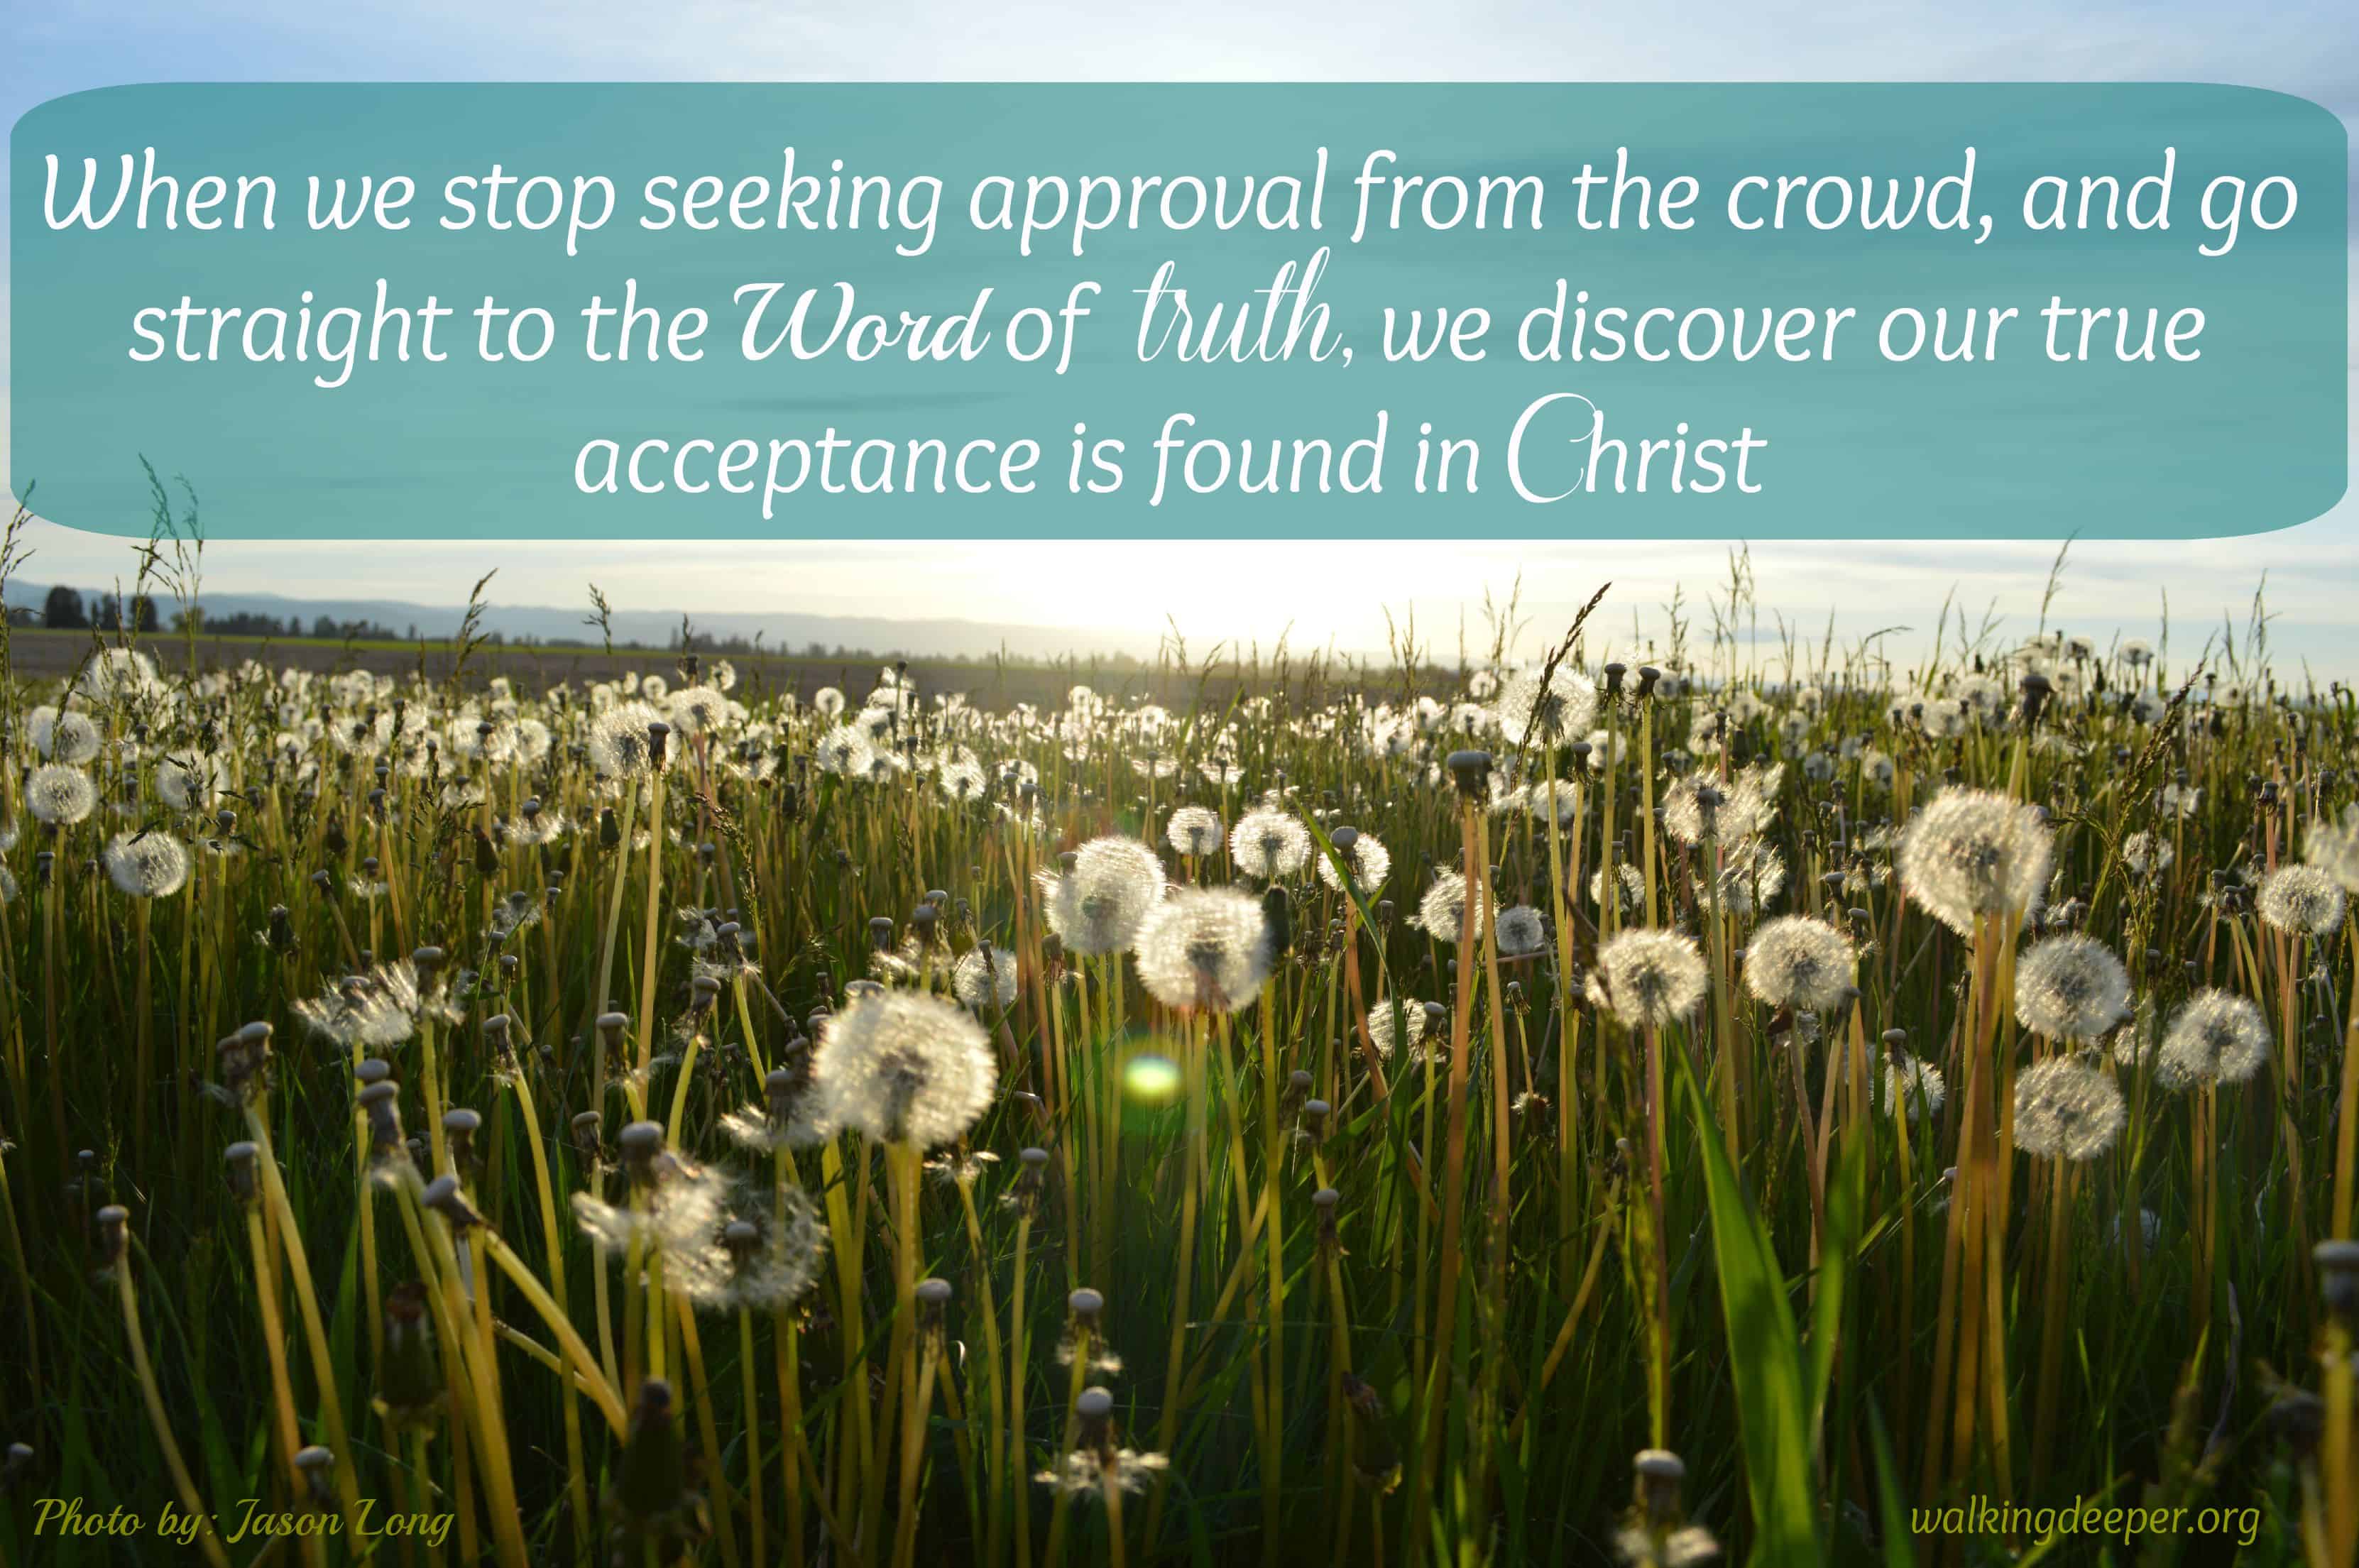 Whose Approval Are We Seeking?